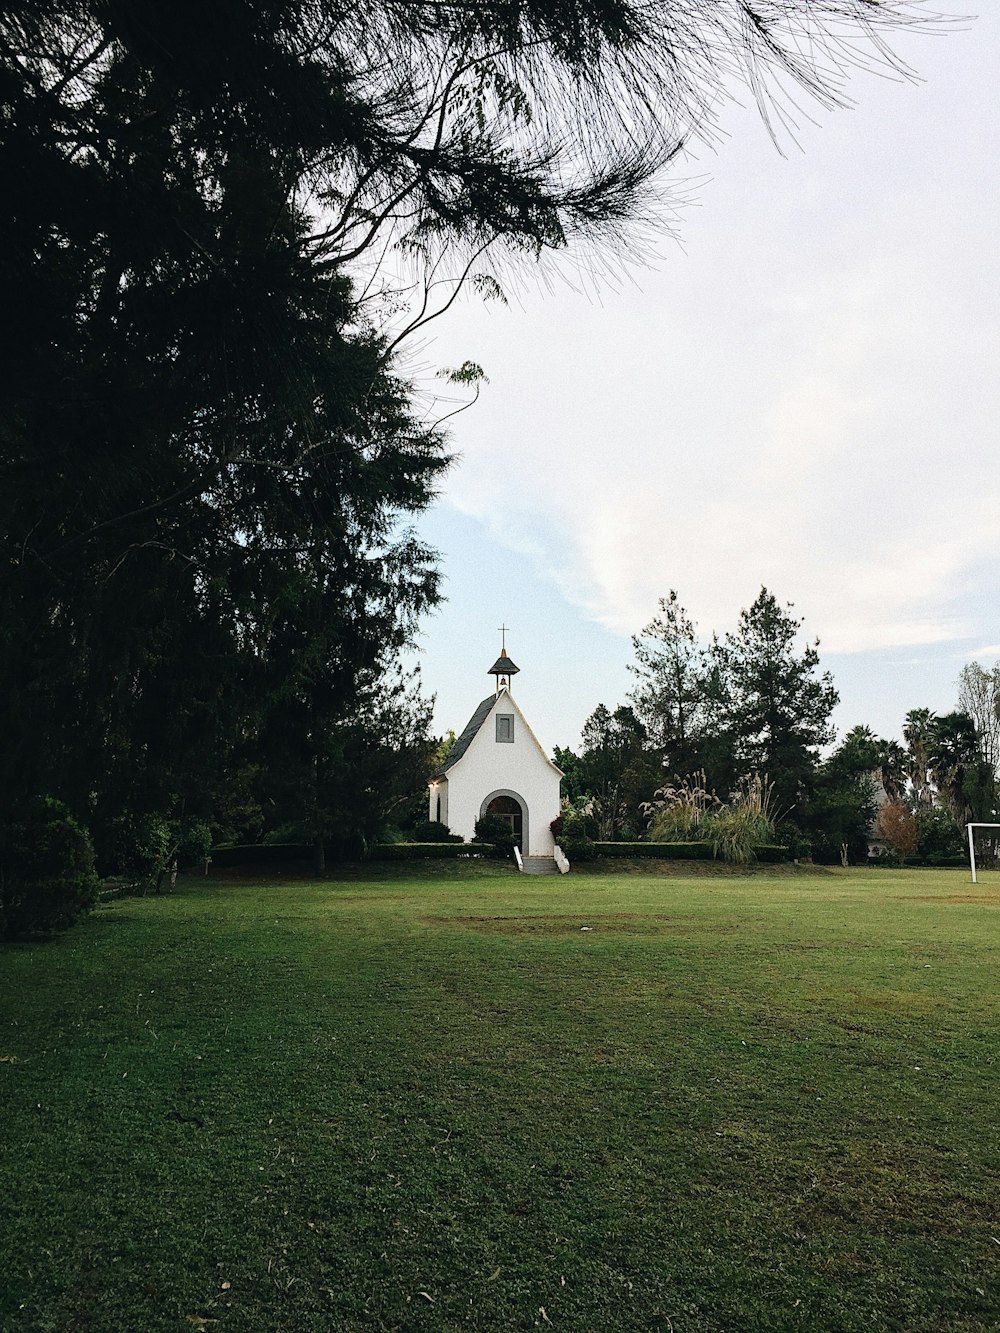 white painted church surrounded by tall trees